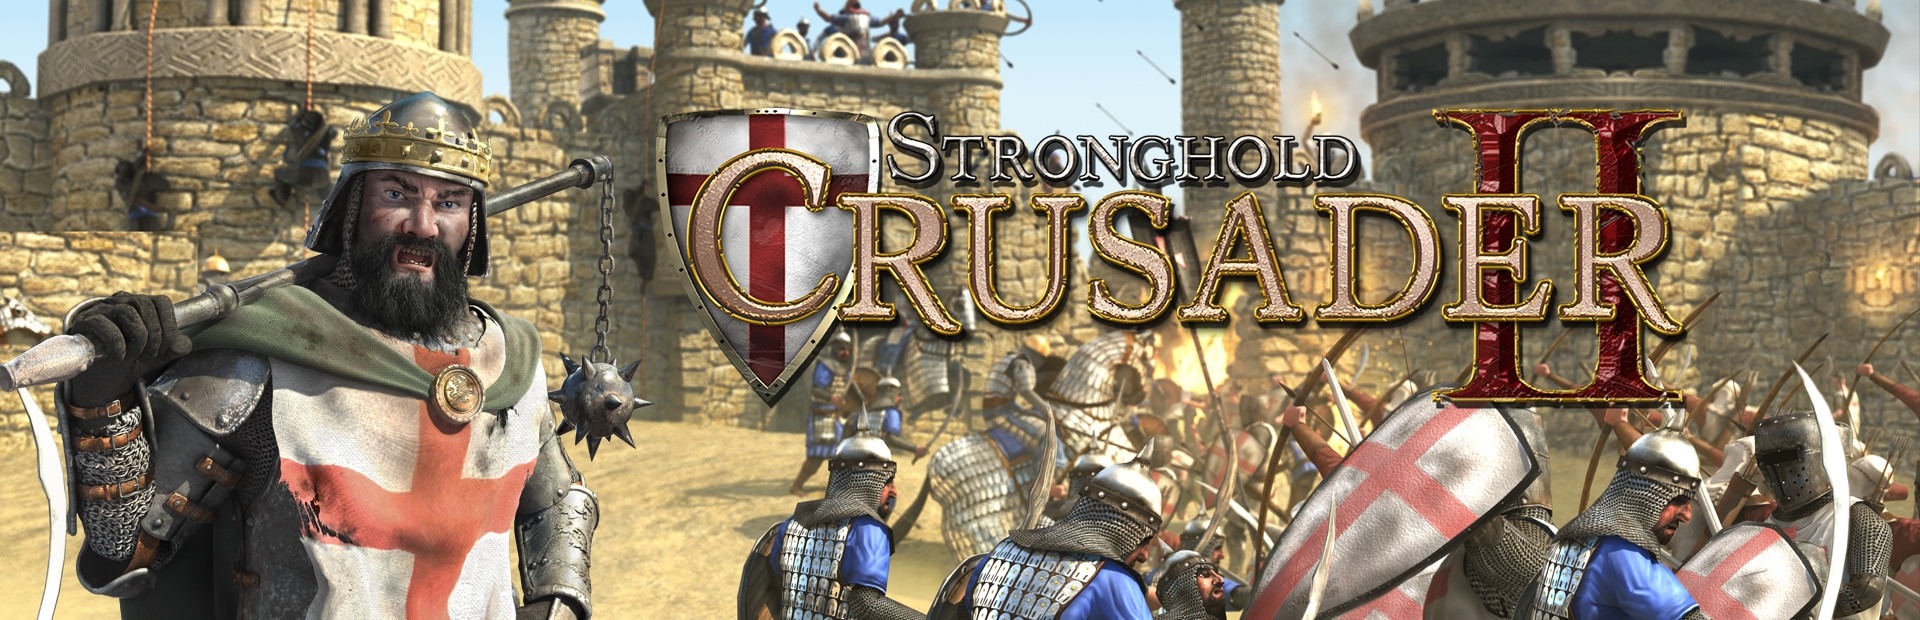 Stronghold Crusader 2: Special Edition